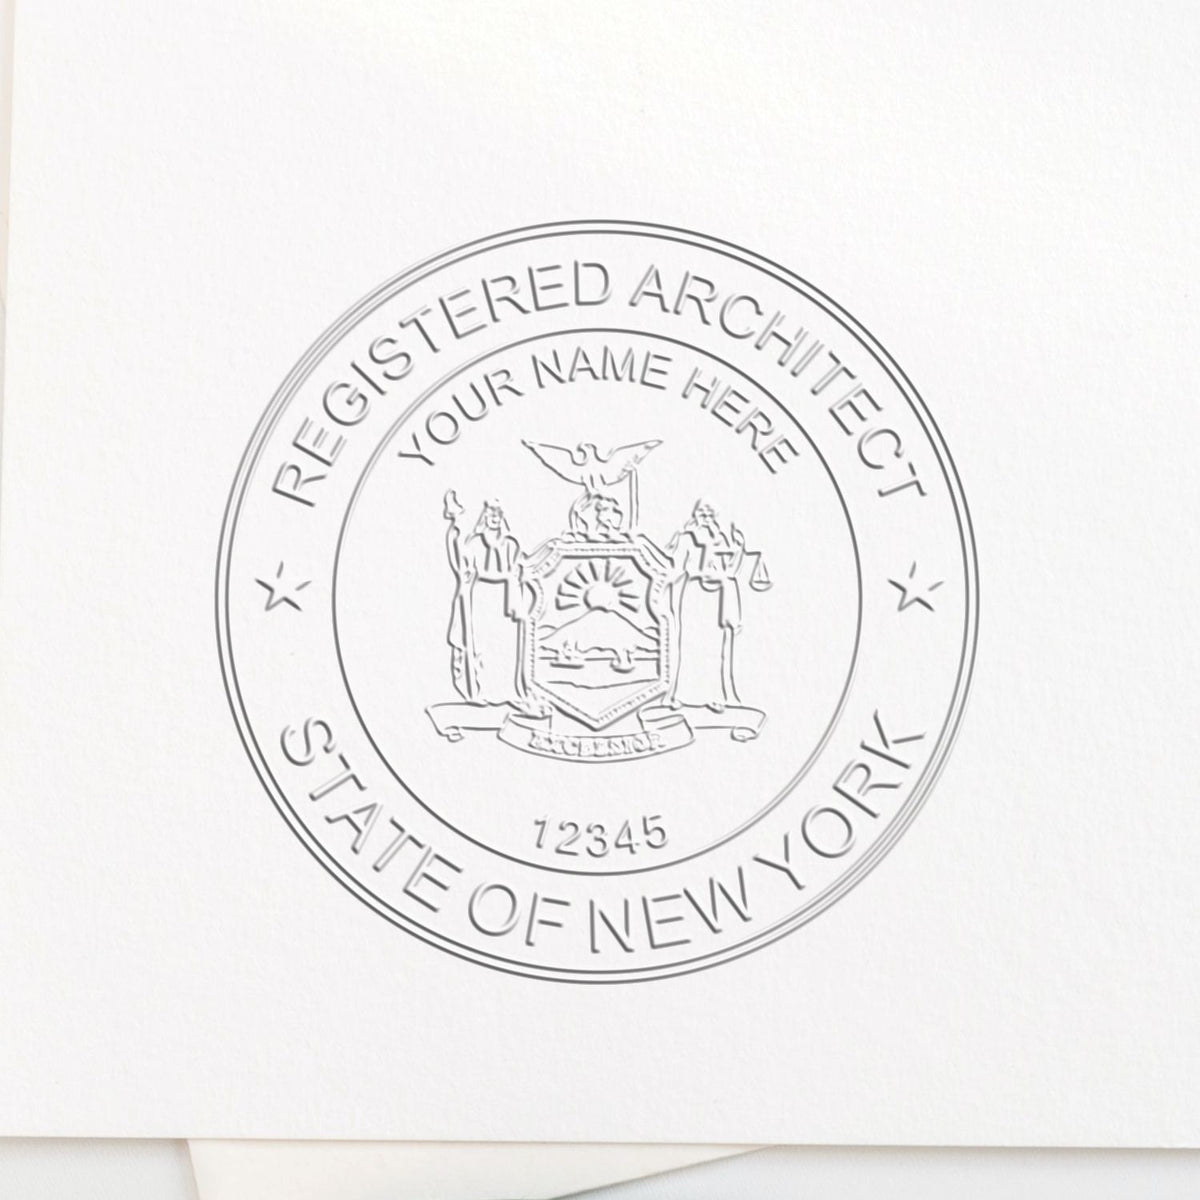 The State of New York Long Reach Architectural Embossing Seal stamp impression comes to life with a crisp, detailed photo on paper - showcasing true professional quality.